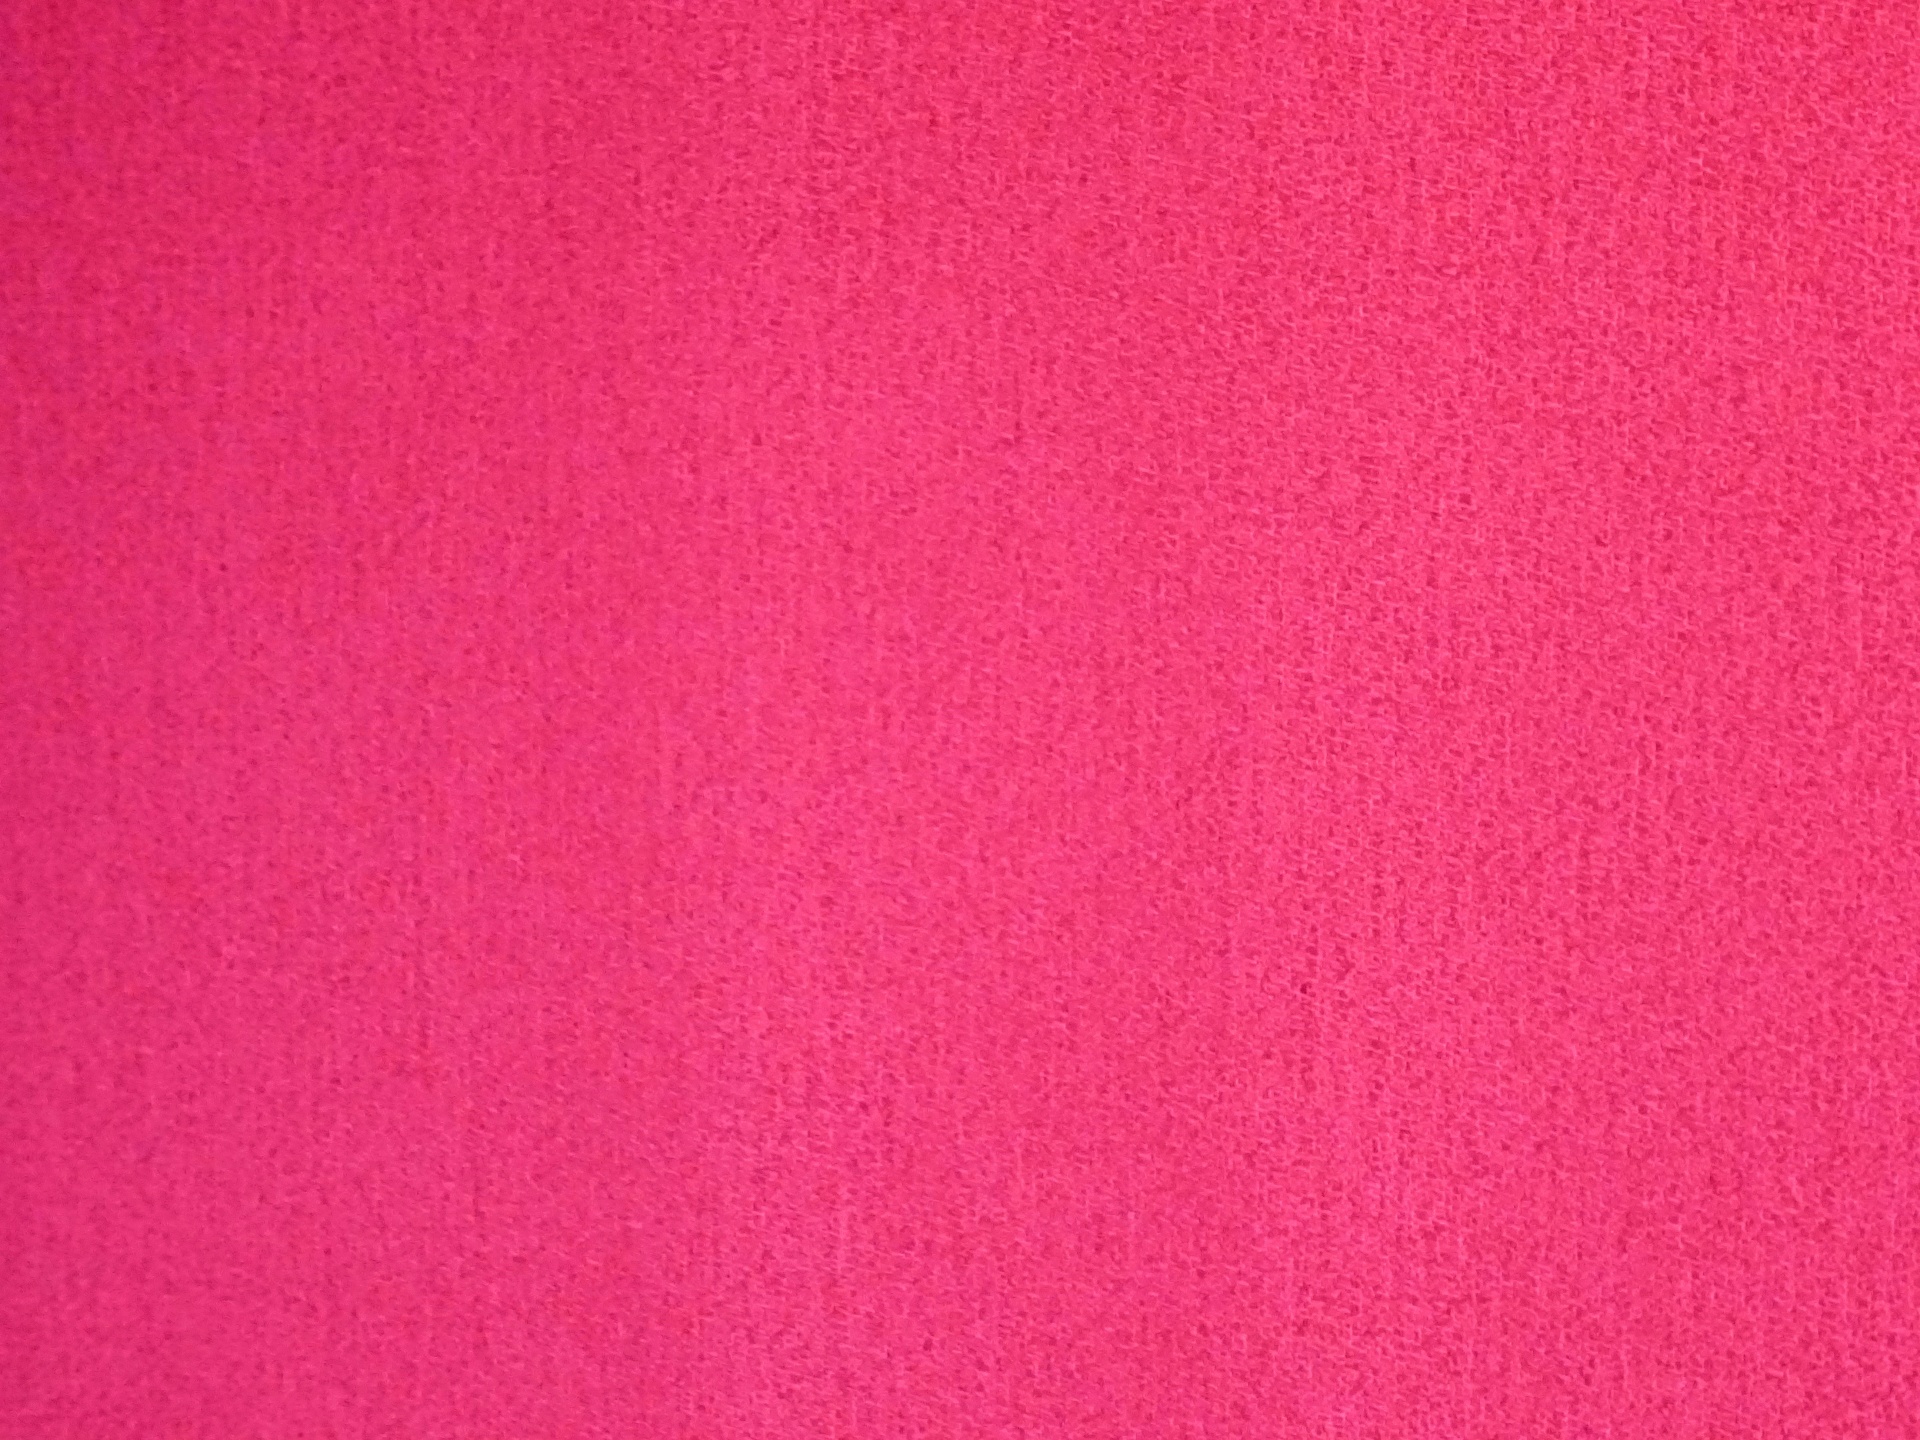 red pink background free photo